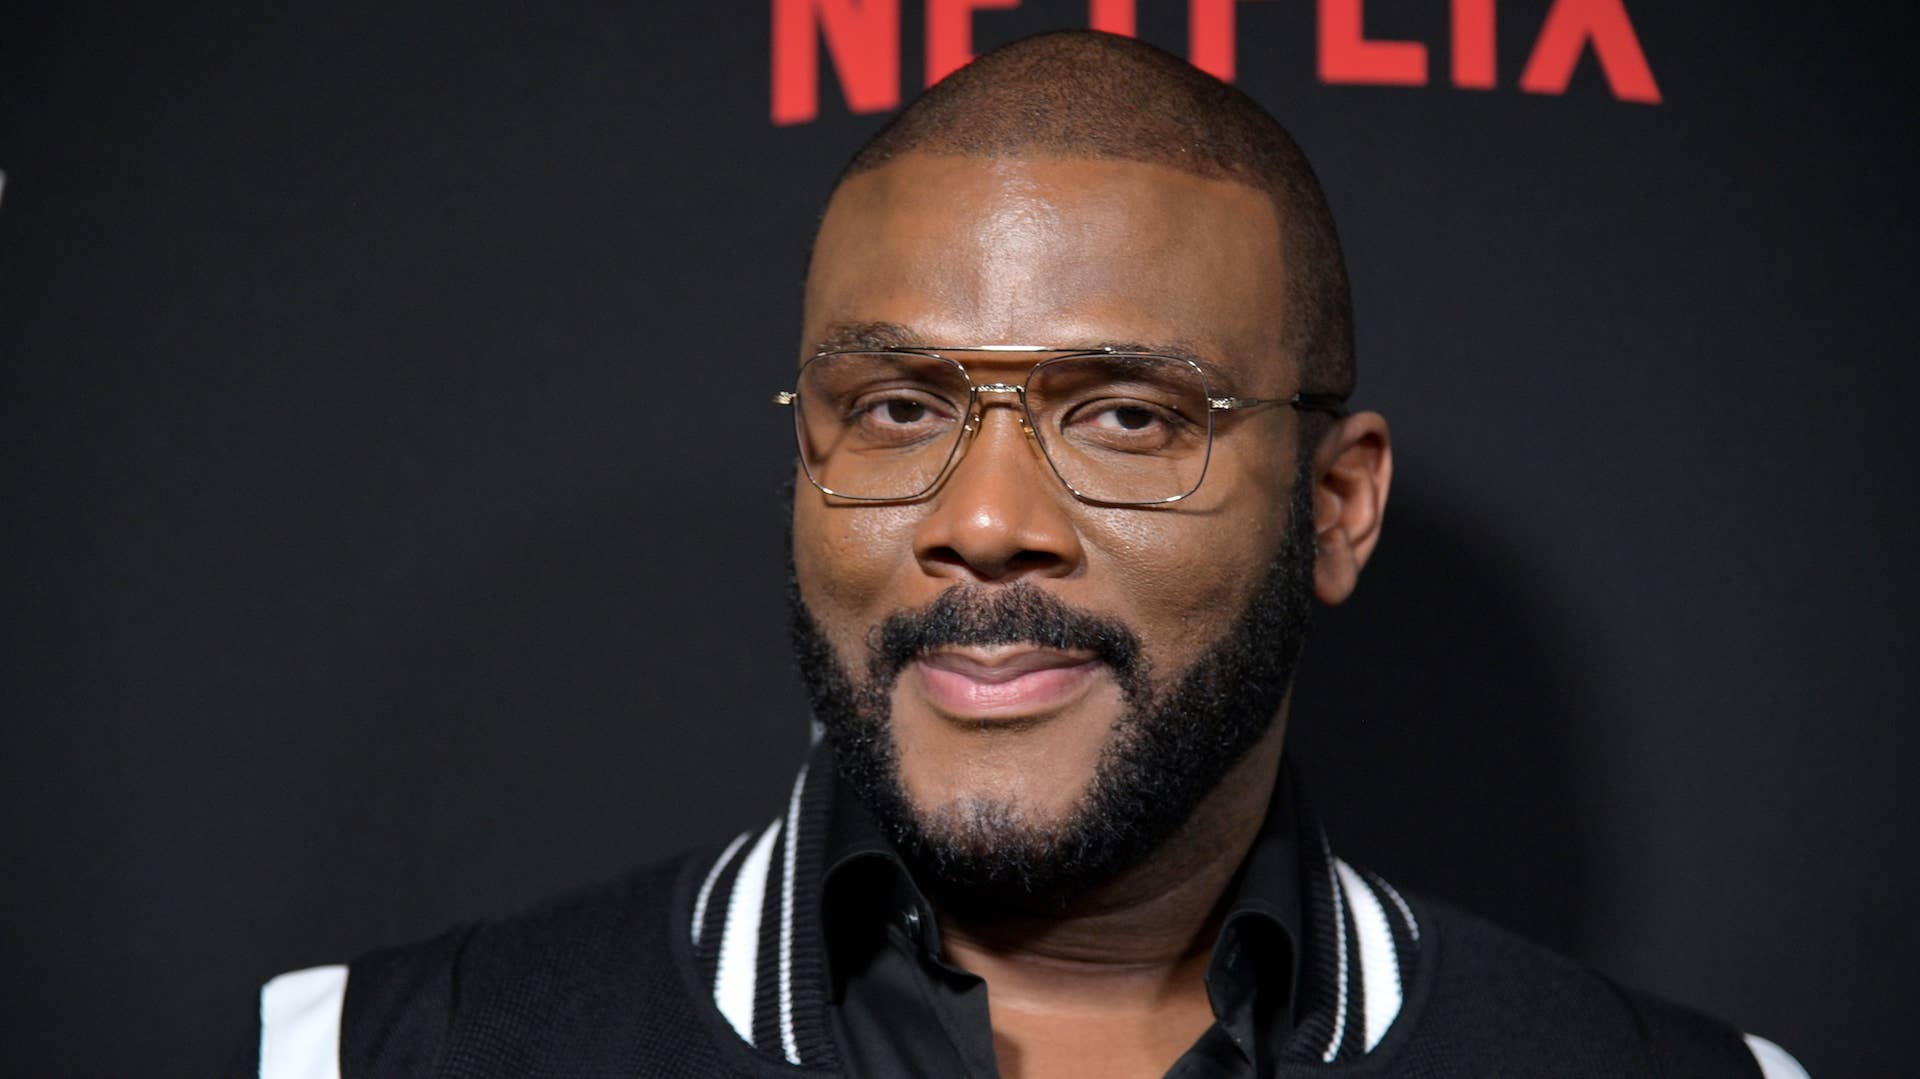 Tyler Perry attends Tyler Perry's "A Fall From Grace" New York premiere.